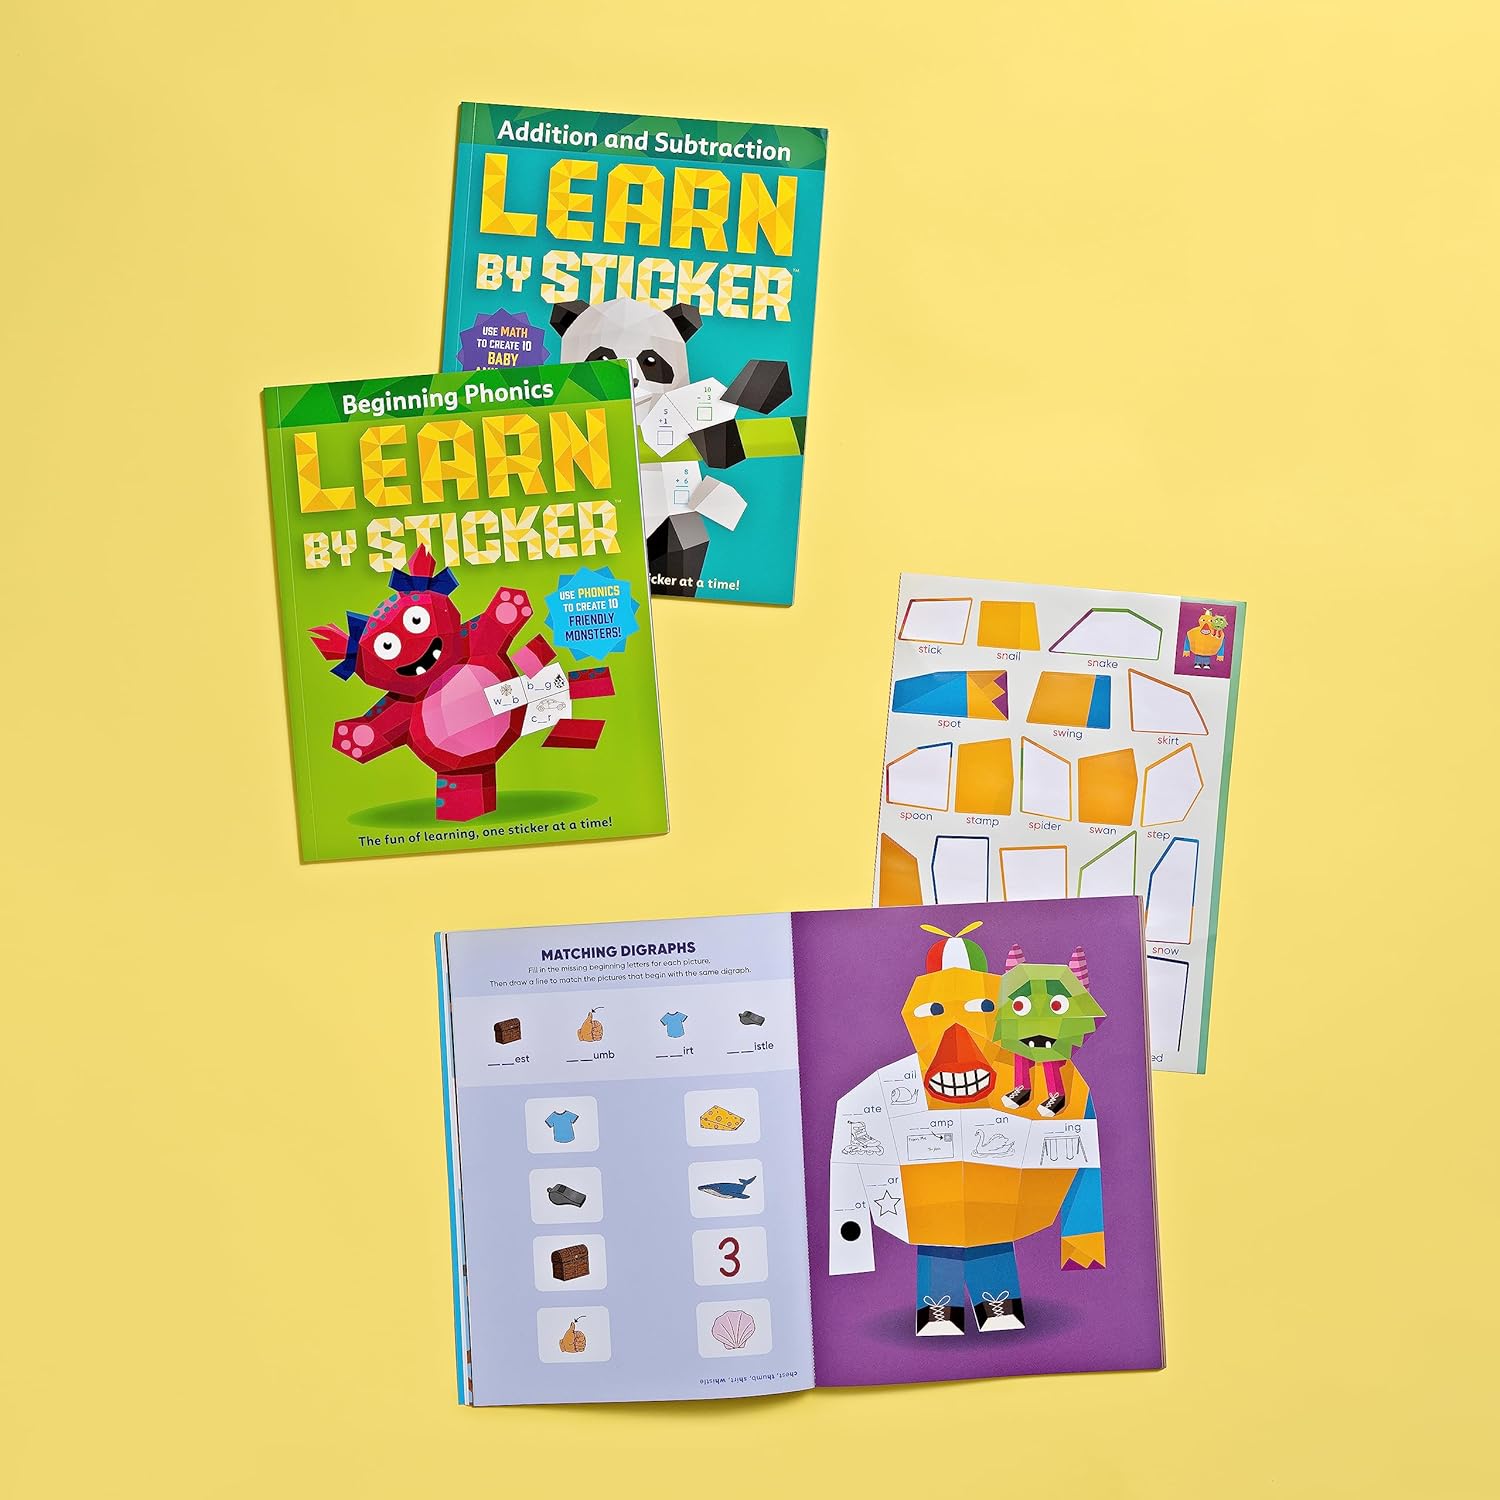 Learn by Sticker: Learn by Sticker: Beginning Phonics: Use Phonics to Create 10 Friendly Monsters!-HACHETTE BOOK GROUP USA-Little Giant Kidz